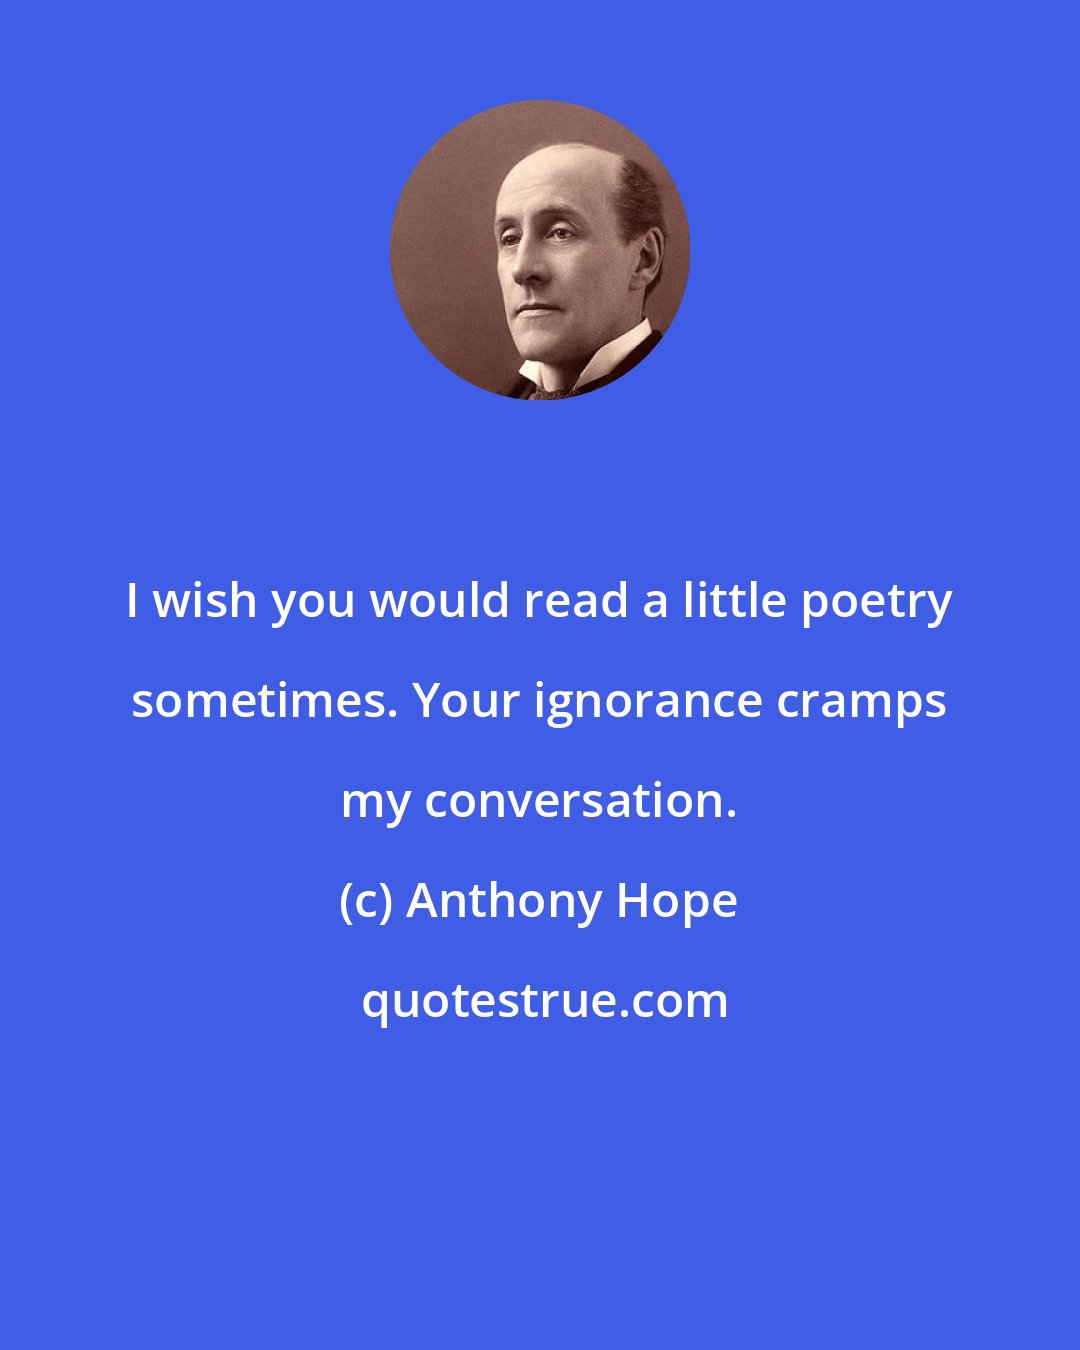 Anthony Hope: I wish you would read a little poetry sometimes. Your ignorance cramps my conversation.